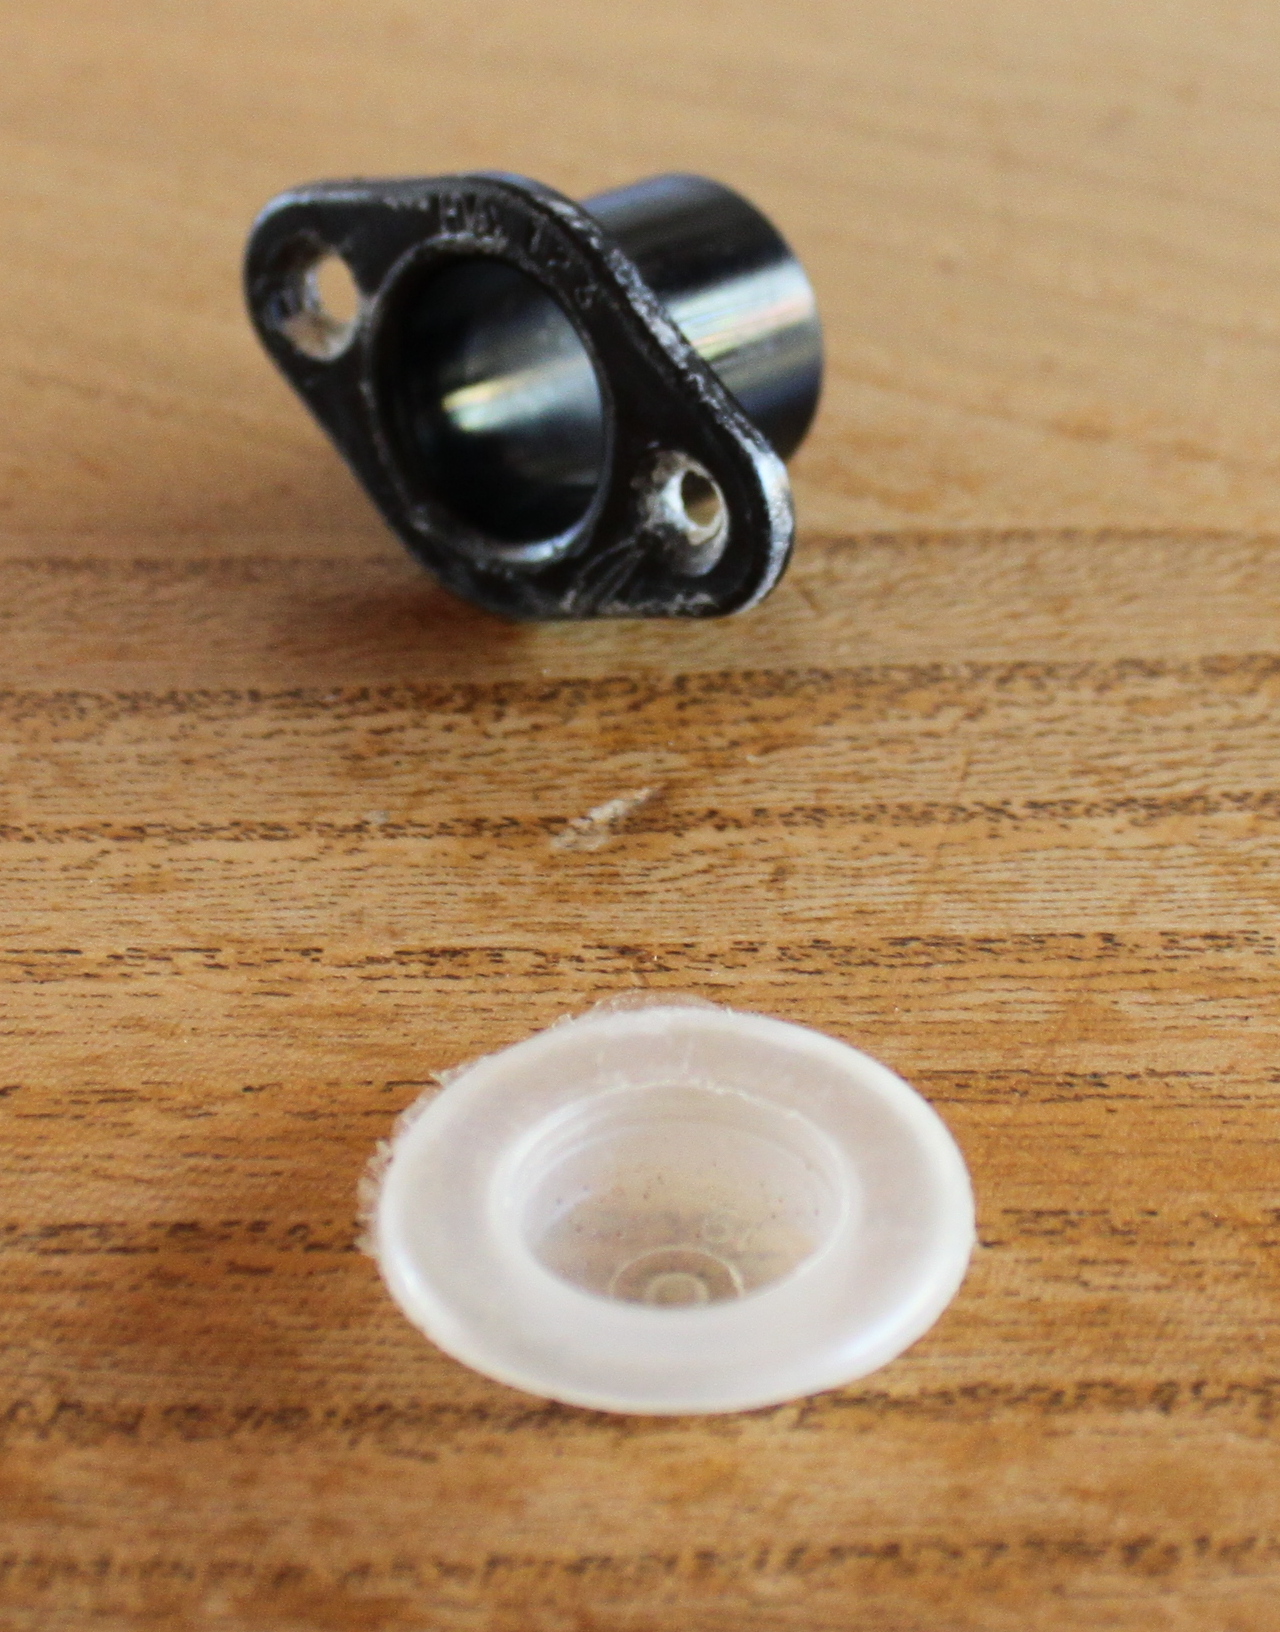 A black plastic drainage hole fitting and a semi-transparent plastic cap to seal it